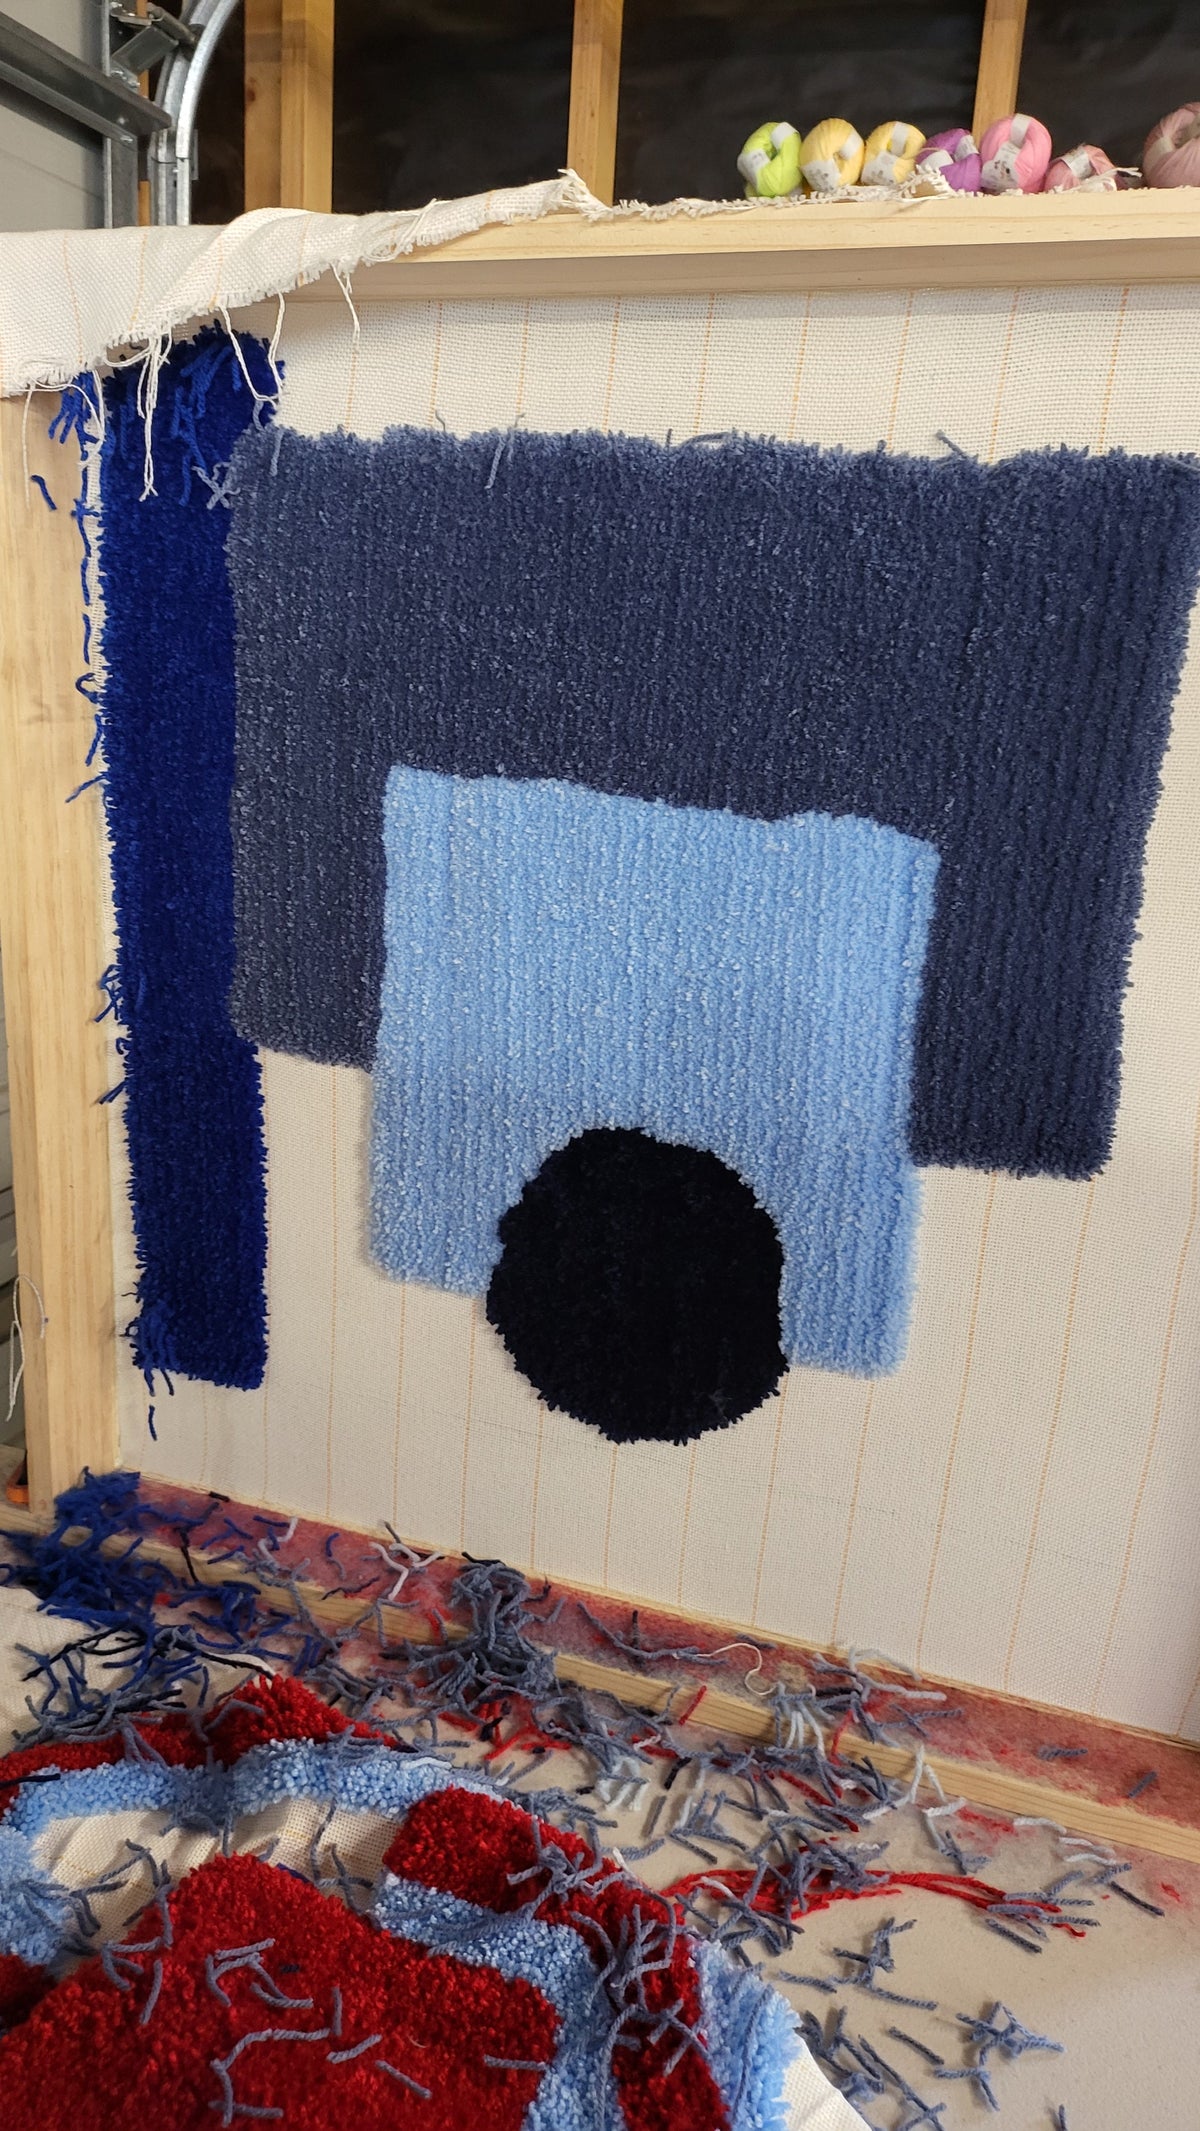 Online Course - Tufting-Gun Tapestry with Felt and Embroidery